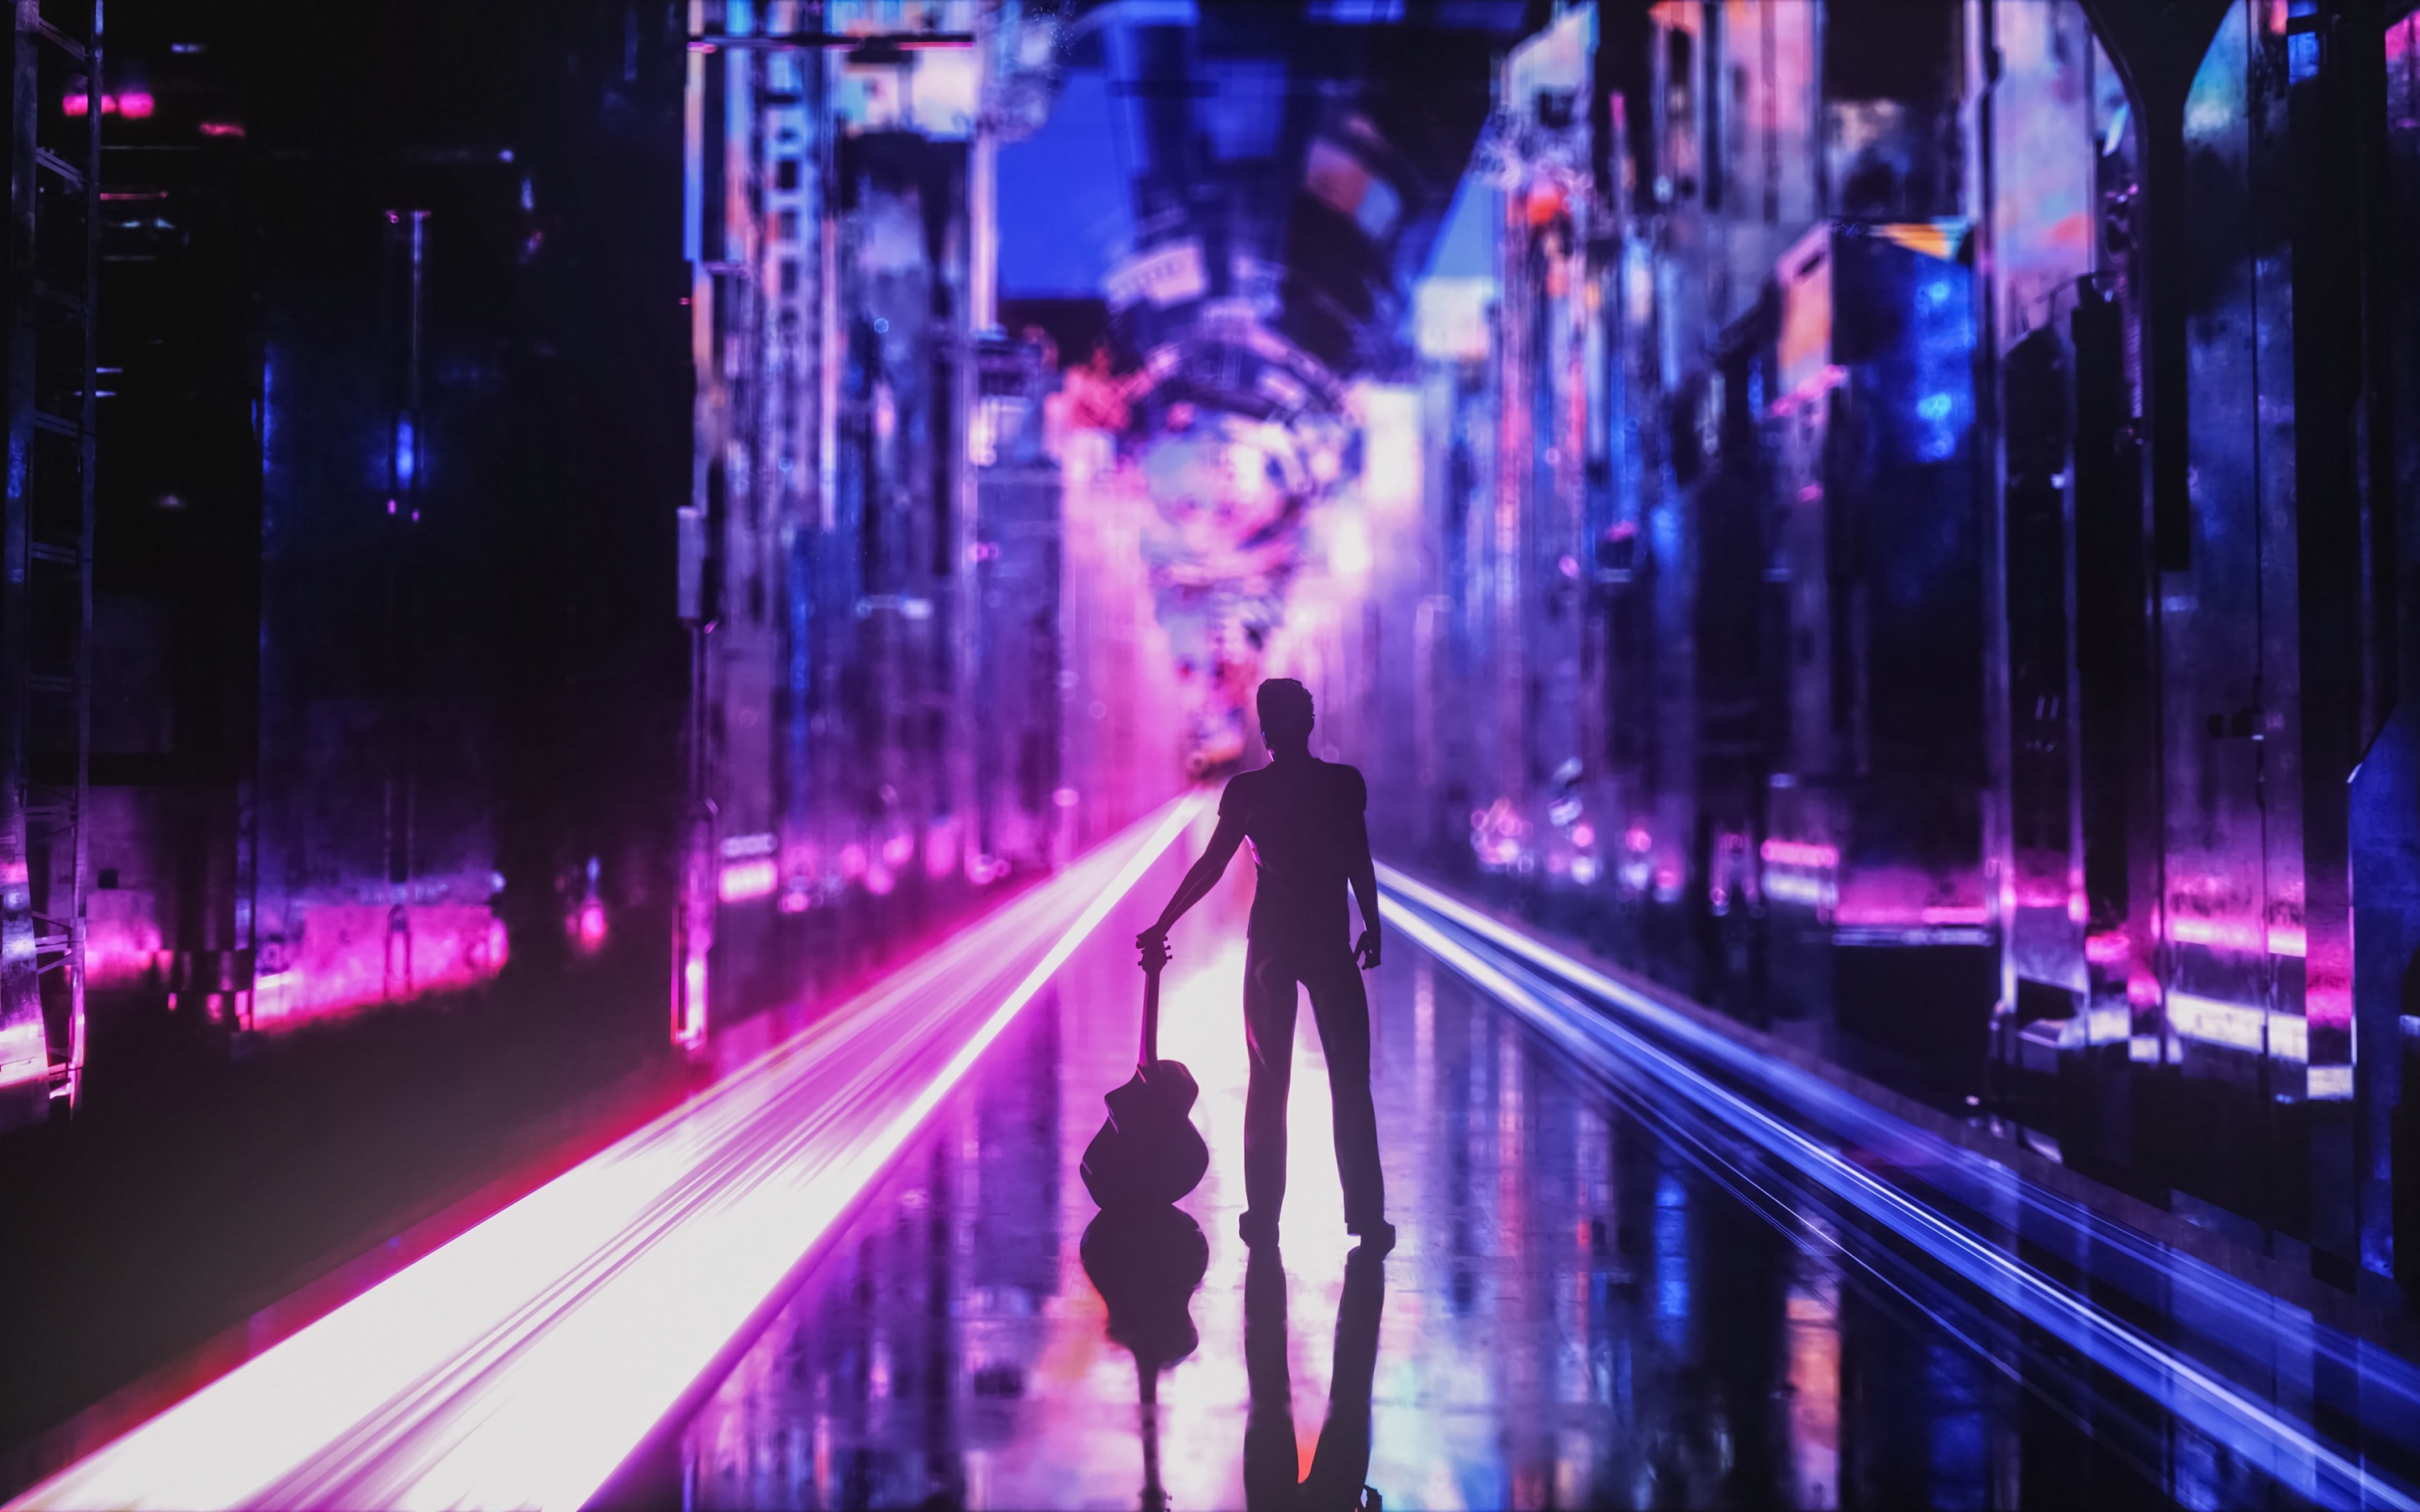 A person standing in a neon-lit city with a suitcase. - Cyberpunk